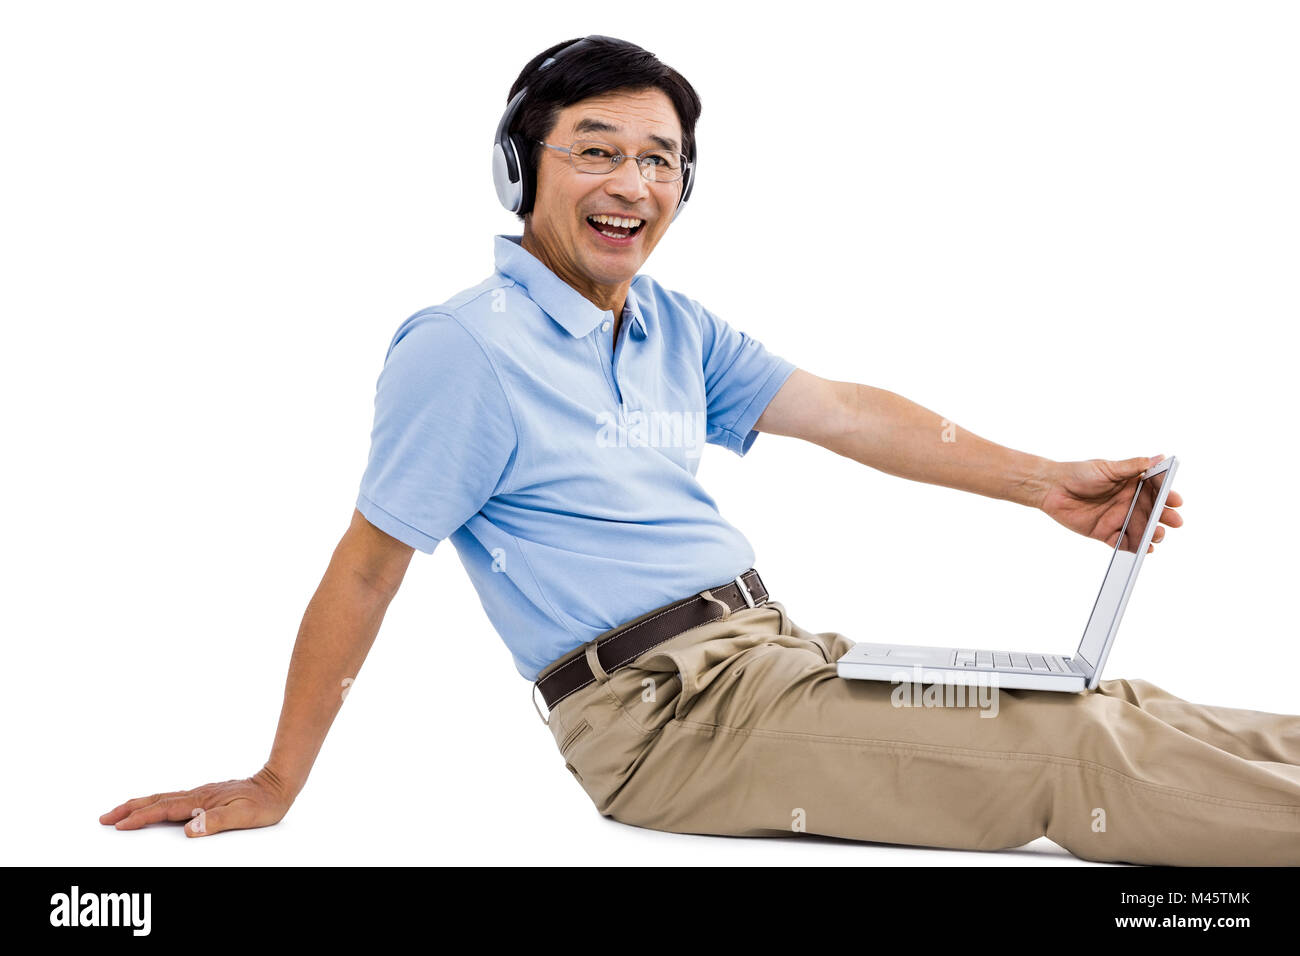 Portrait of cheerful man using laptop while listening music Banque D'Images